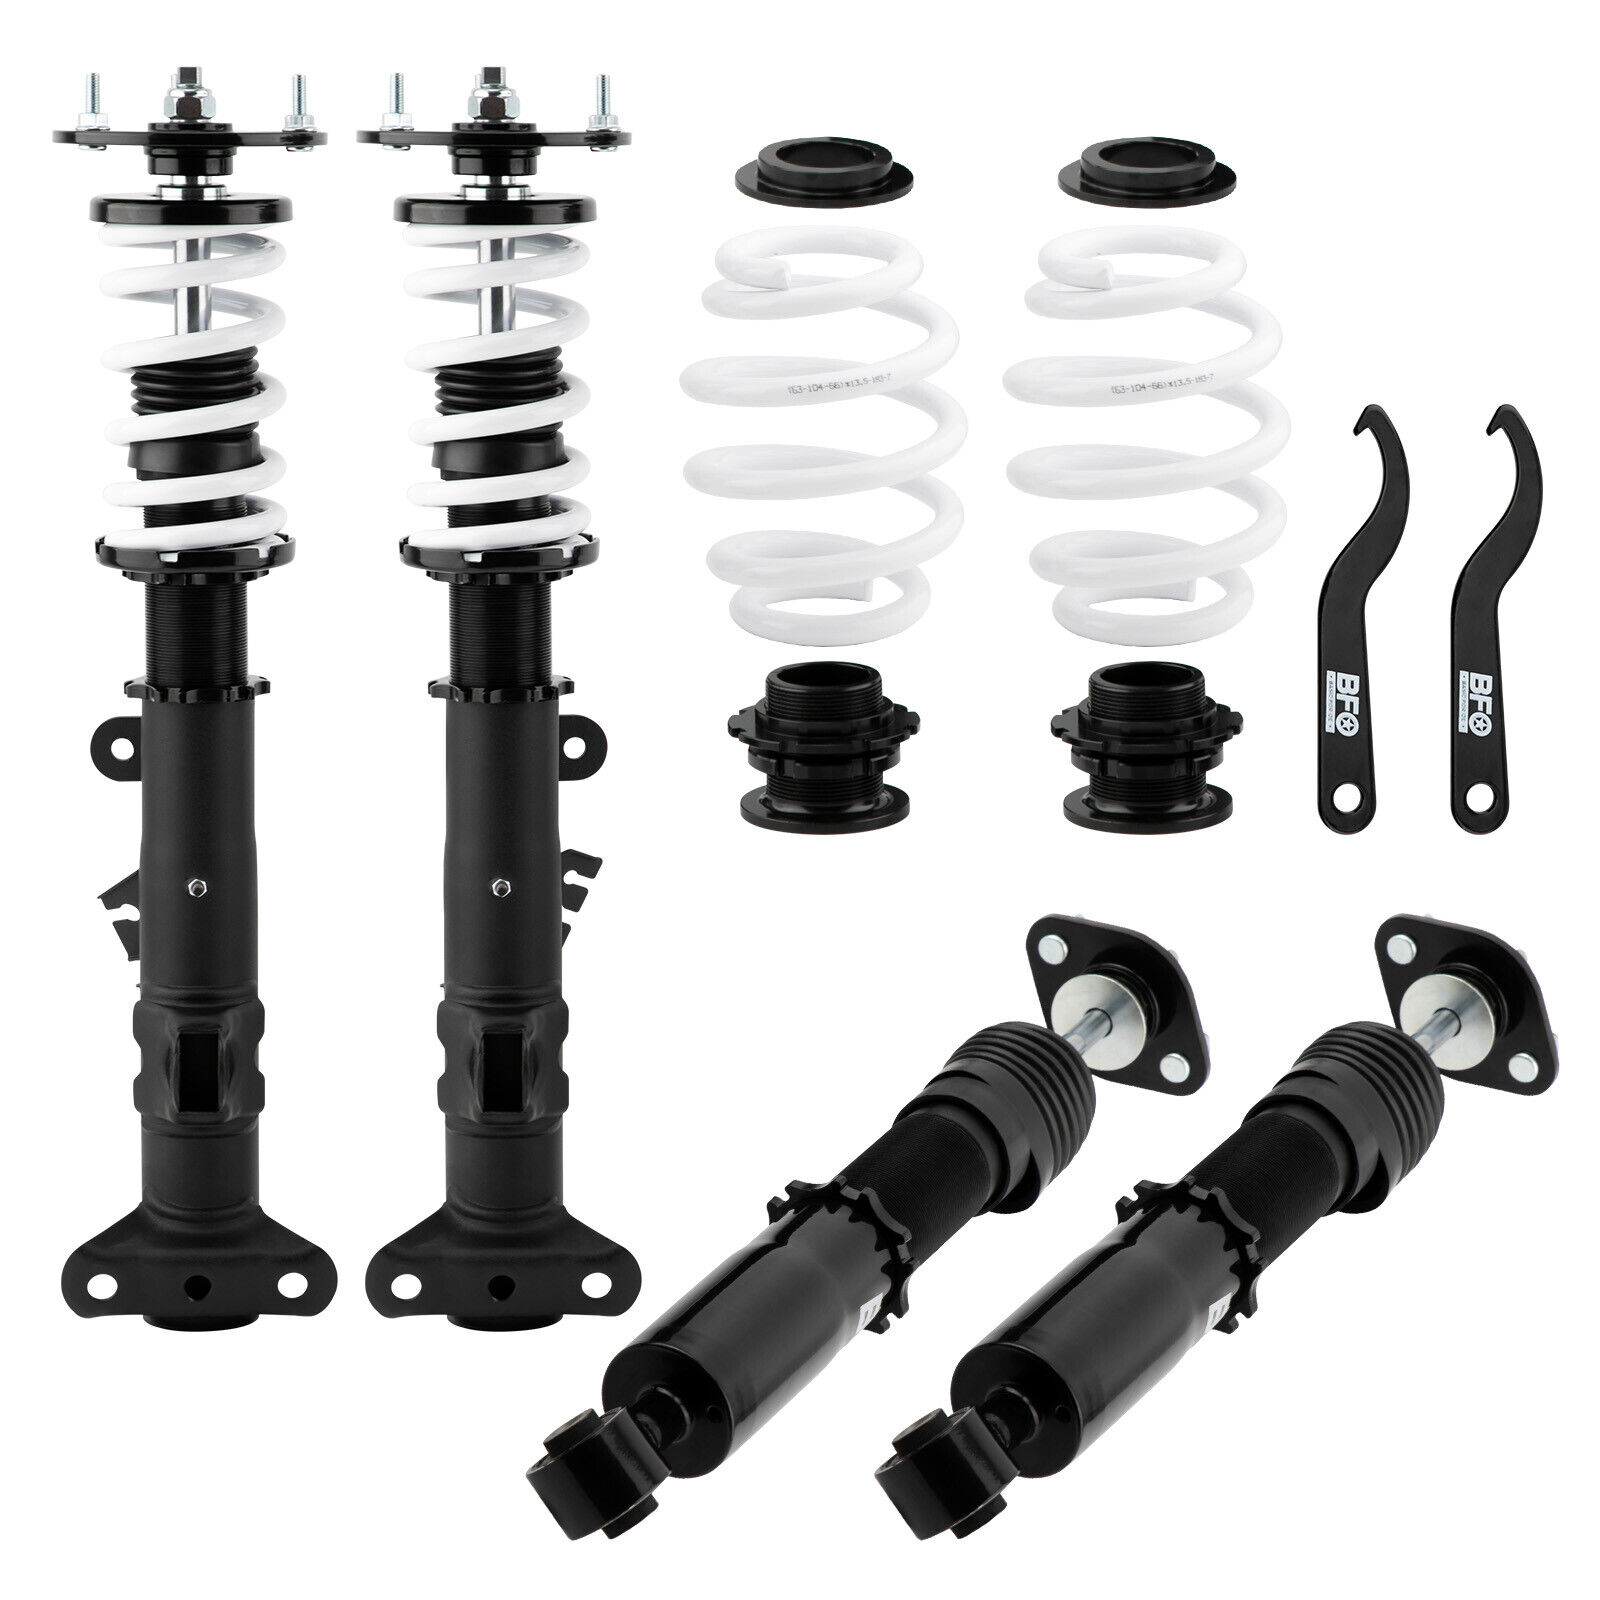 BFO Coilovers Suspension Kit for BMW Z3 M Roadster/ Coupe (E36) 1996-2002